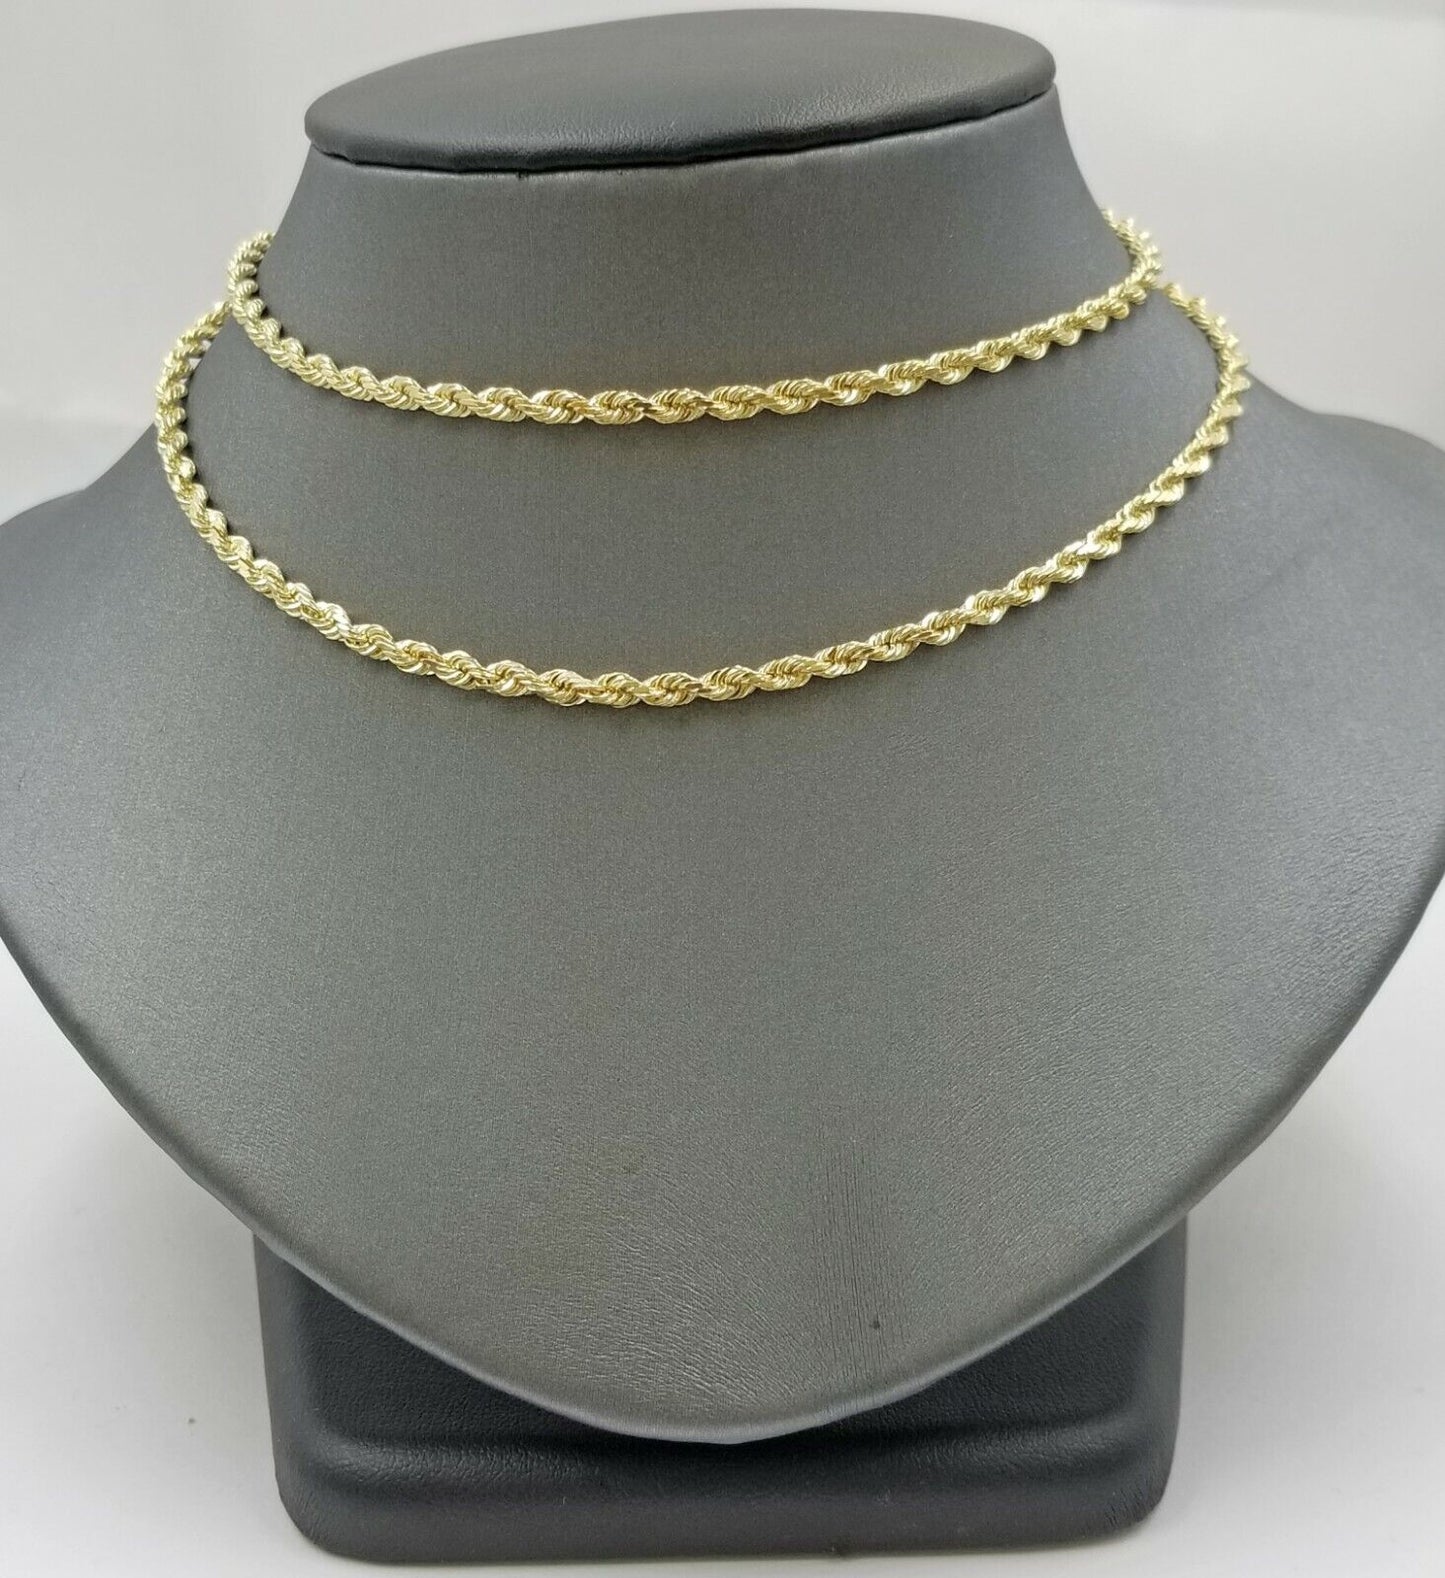 Real 18k Solid Yellow Gold Rope Chain 2mm Diamond Cut 22" Inches Lobster Lock